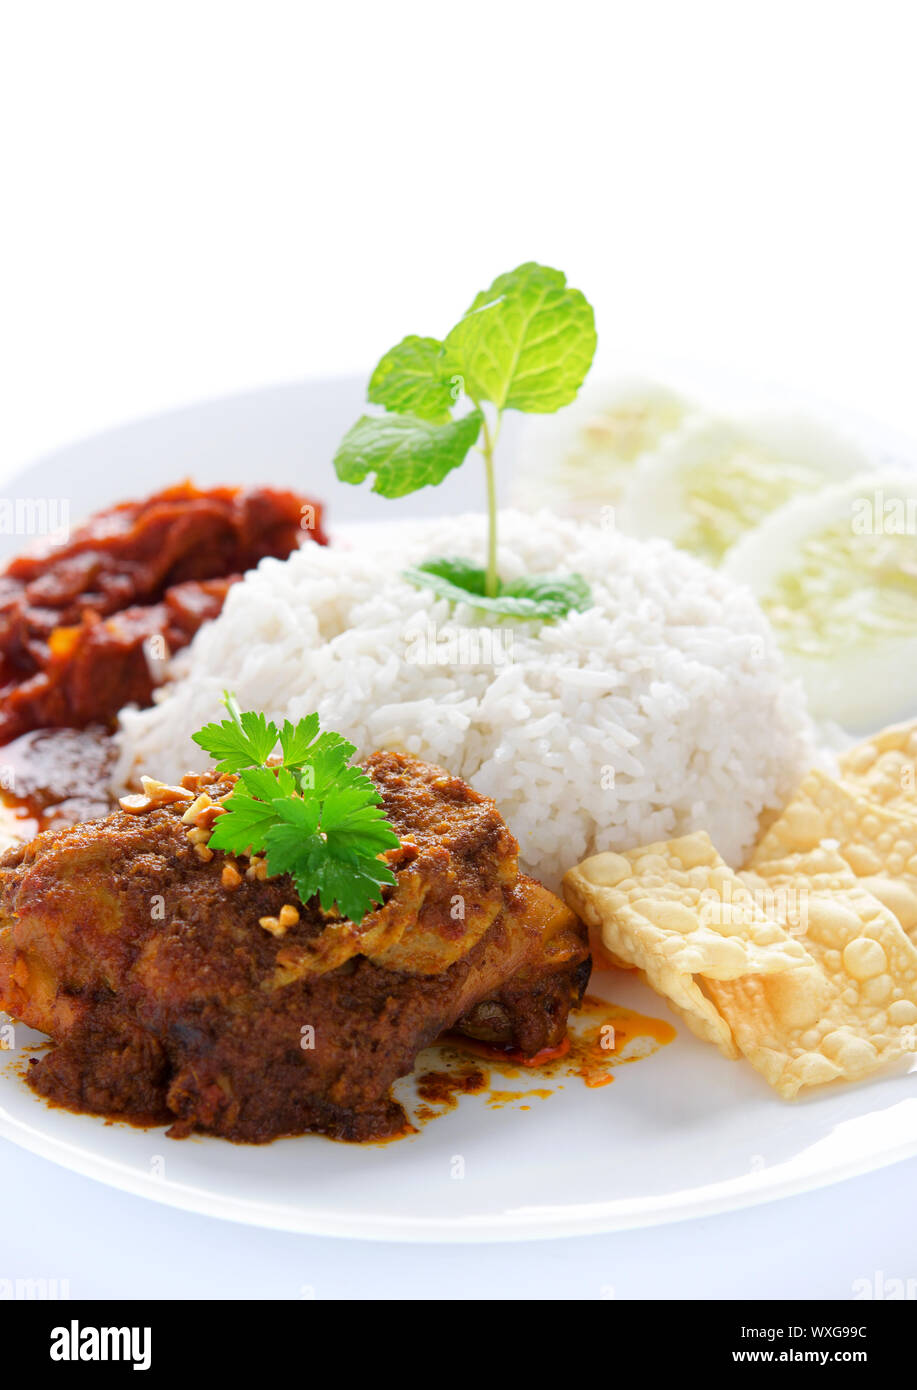 Nasi lemak kukus traditional malaysian spicy rice dish. Served with belacan, ikan bilis, acar, peanuts and cucumber. White background. Stock Photo